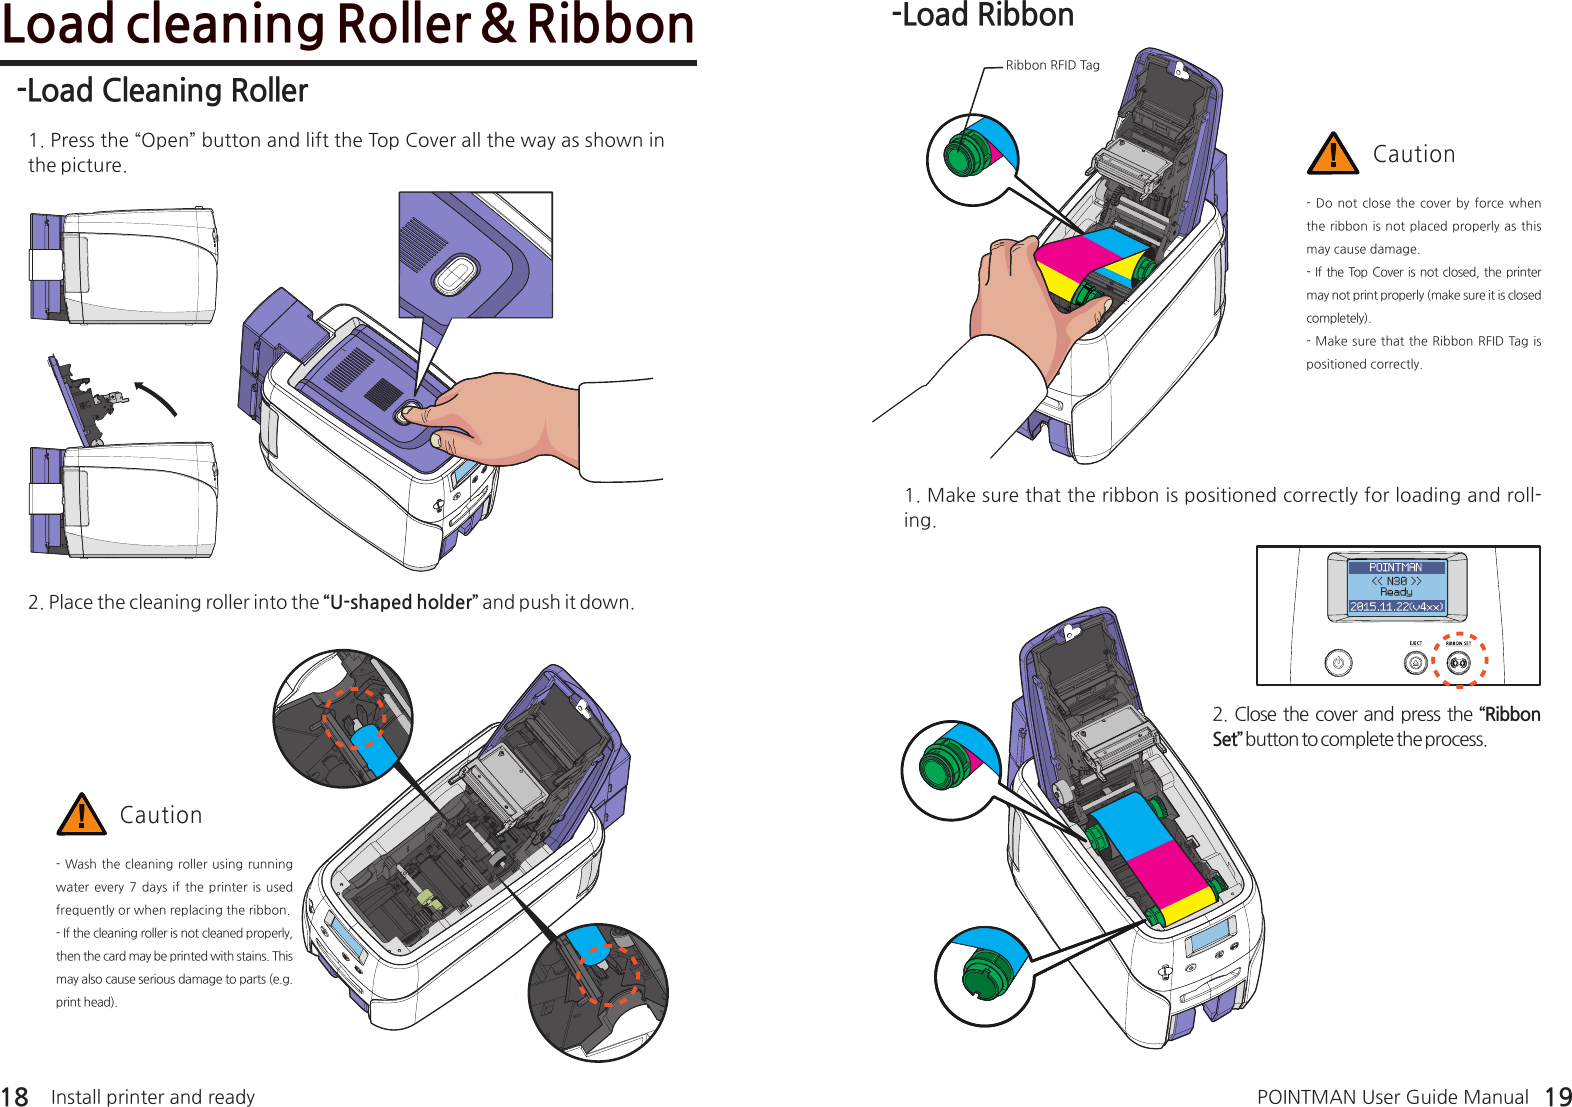 -Load Cleaning Roller 1. Press the “Open” button and lift the Top Cover all the way as shown in the picture.Load cleaning Roller &amp; Ribbon2. Place the cleaning roller into the “U-shaped holder” and push it down.- Wash the cleaning roller using running water every 7 days if the printer is  used frequently or when replacing the ribbon.- If the cleaning roller is not cleaned properly, then the card may be printed with stains. This may also cause serious damage to parts (e.g. print head). Caution-Load Ribbon1. Make sure that the ribbon is positioned correctly for loading and roll-ing. - Do not close the cover by  force  when the ribbon is not placed properly as this may cause damage.- If the Top Cover is not closed, the printer may not print properly (make sure it is closed completely).- Make sure that the Ribbon RFID Tag is positioned correctly.Caution2. Close the cover and press the “Ribbon Set” button to complete the process. 18 19Ribbon RFID TagInstall printer and ready POINTMAN User Guide Manual